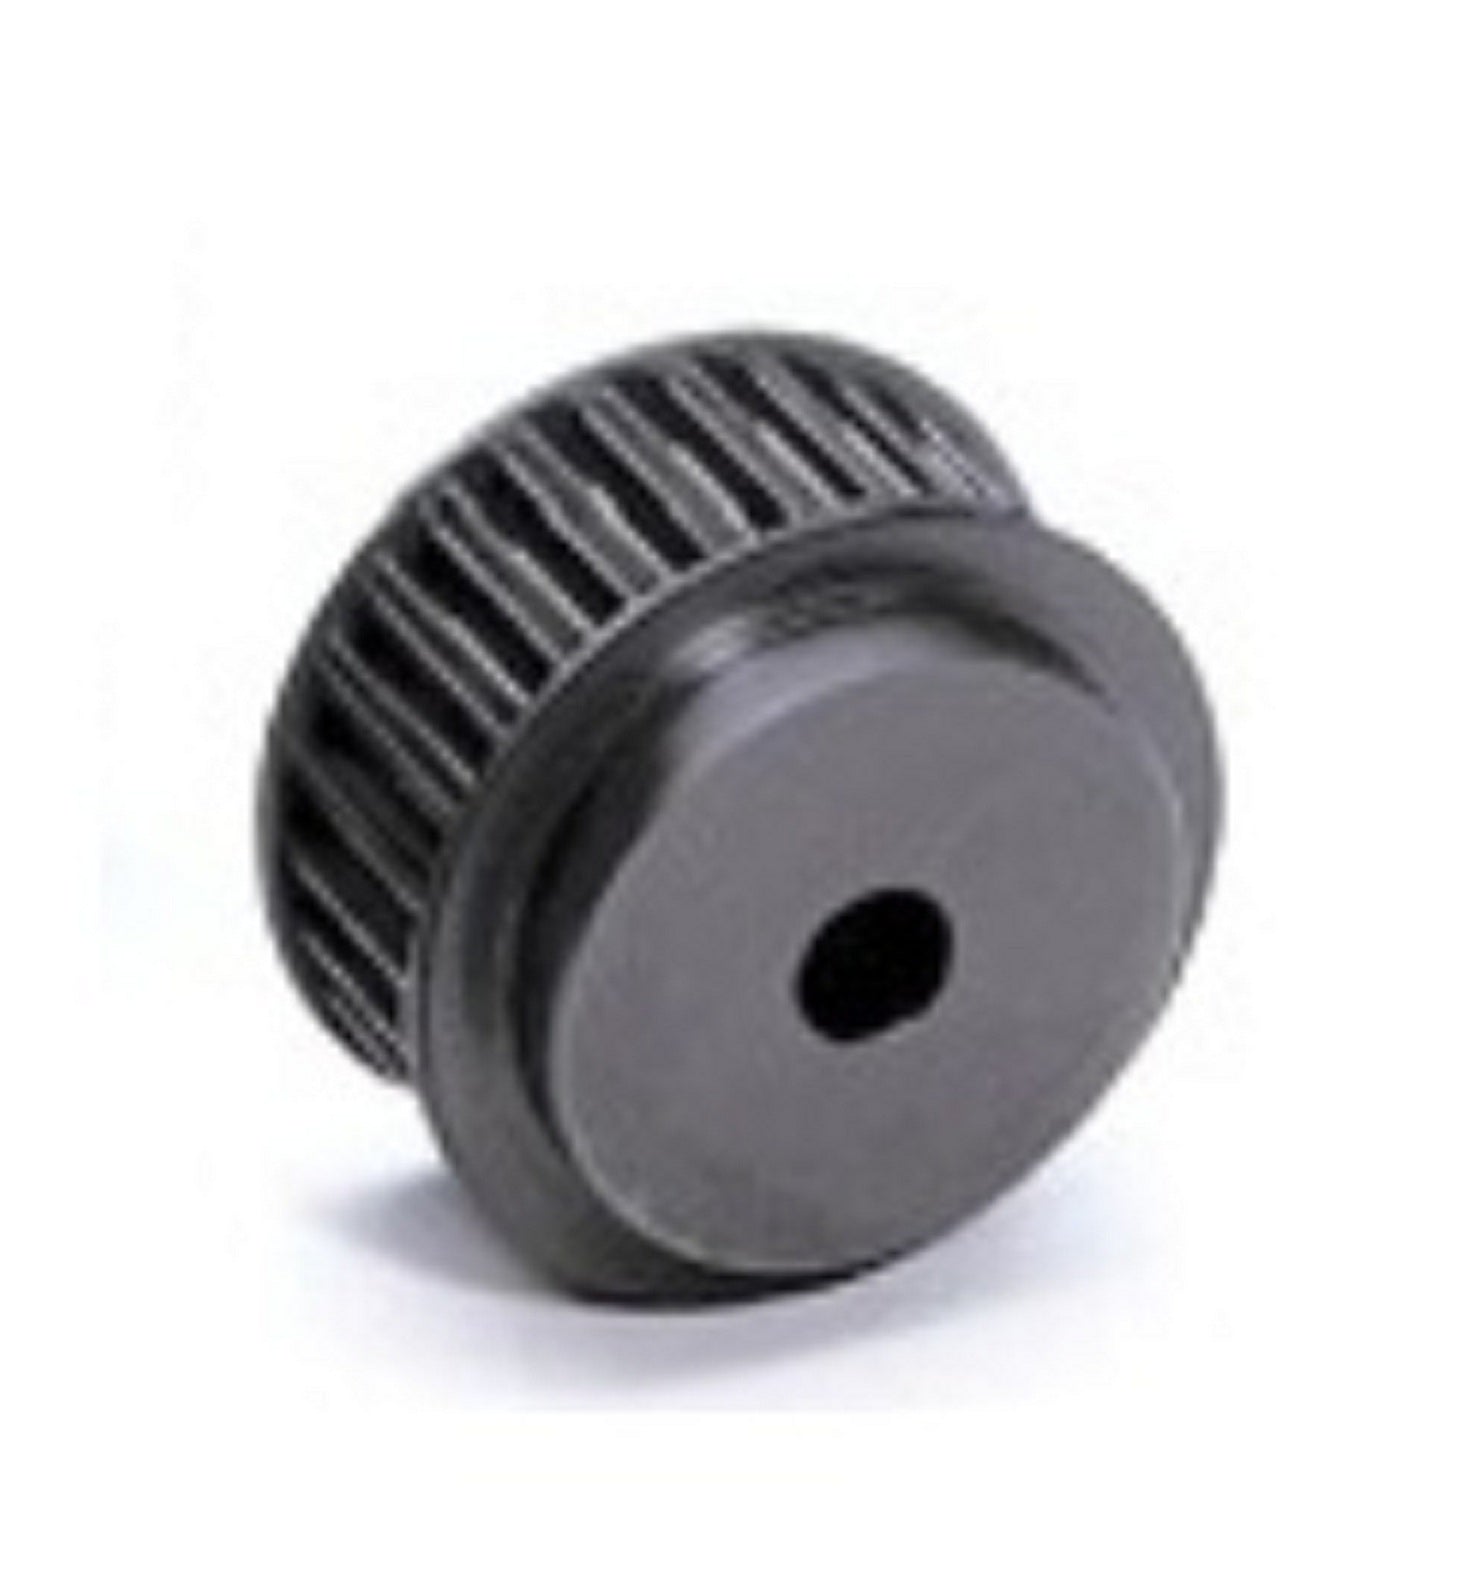 21-8M-30 Steel Pulley 21 tooth MPB